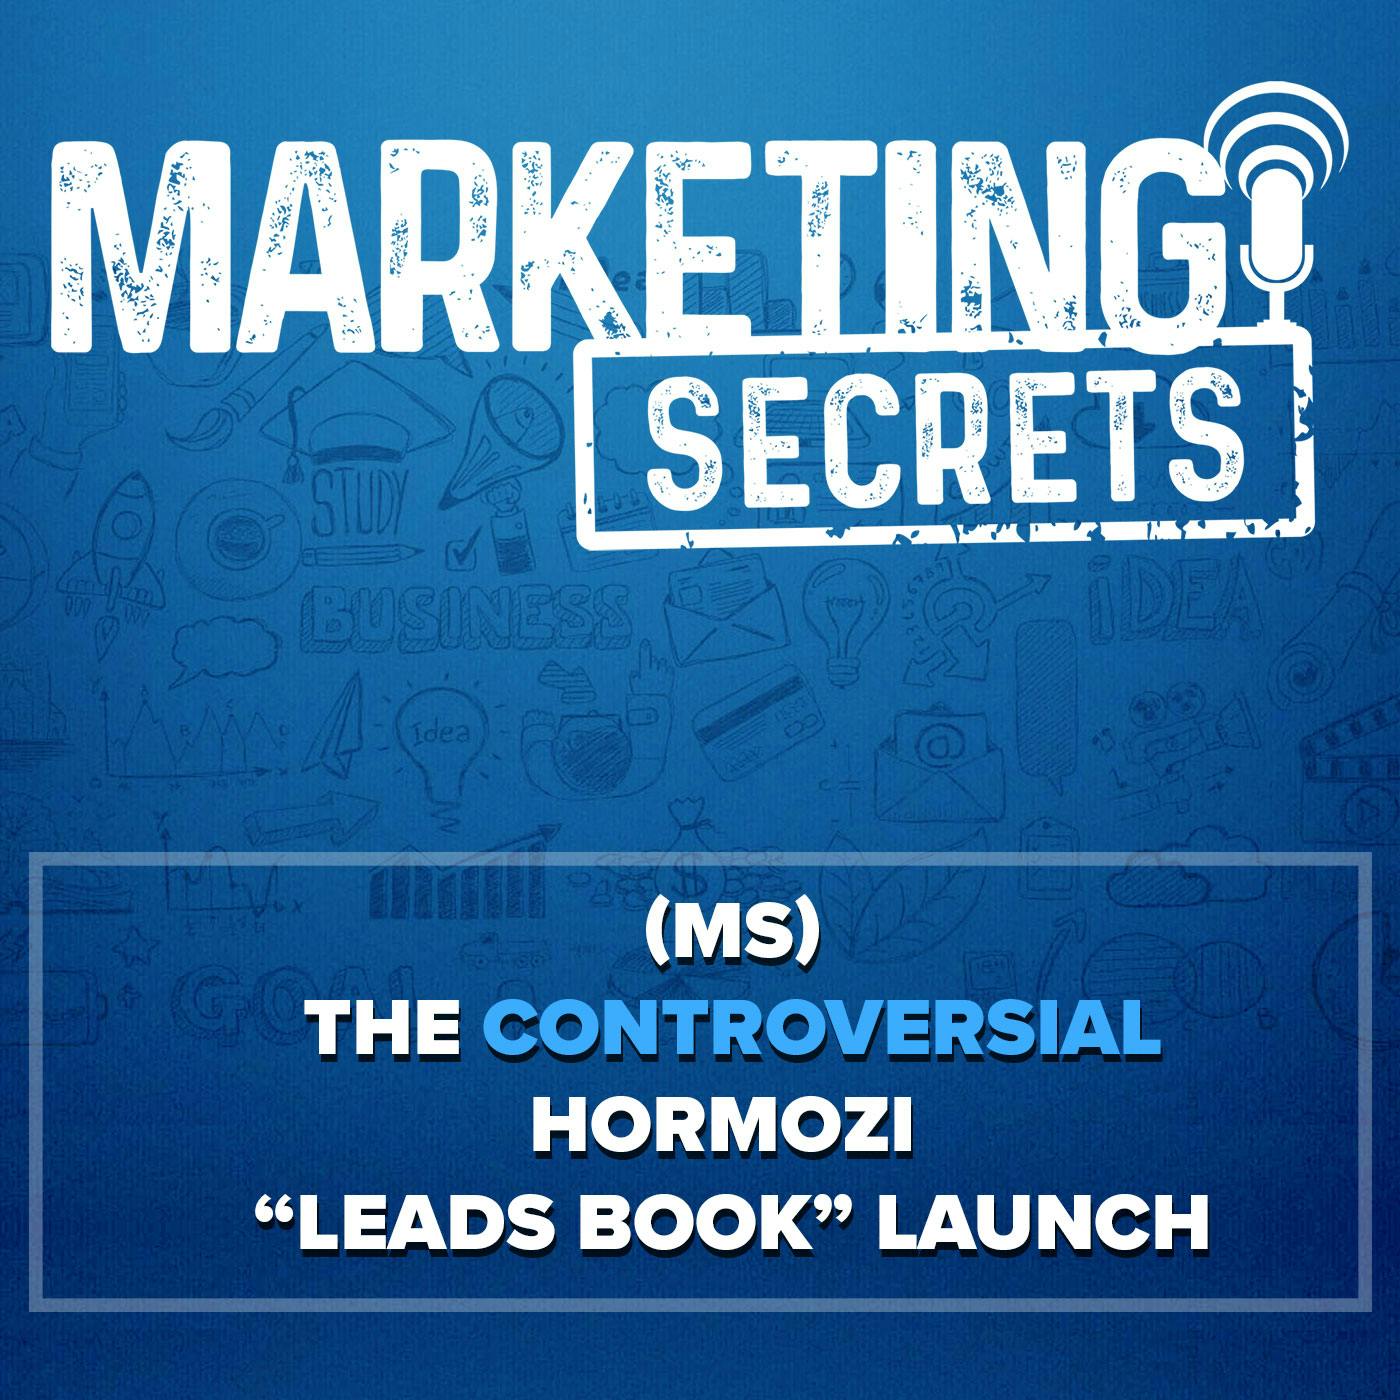 (MS) The Controversial Hormozi "Leads Book" Launch